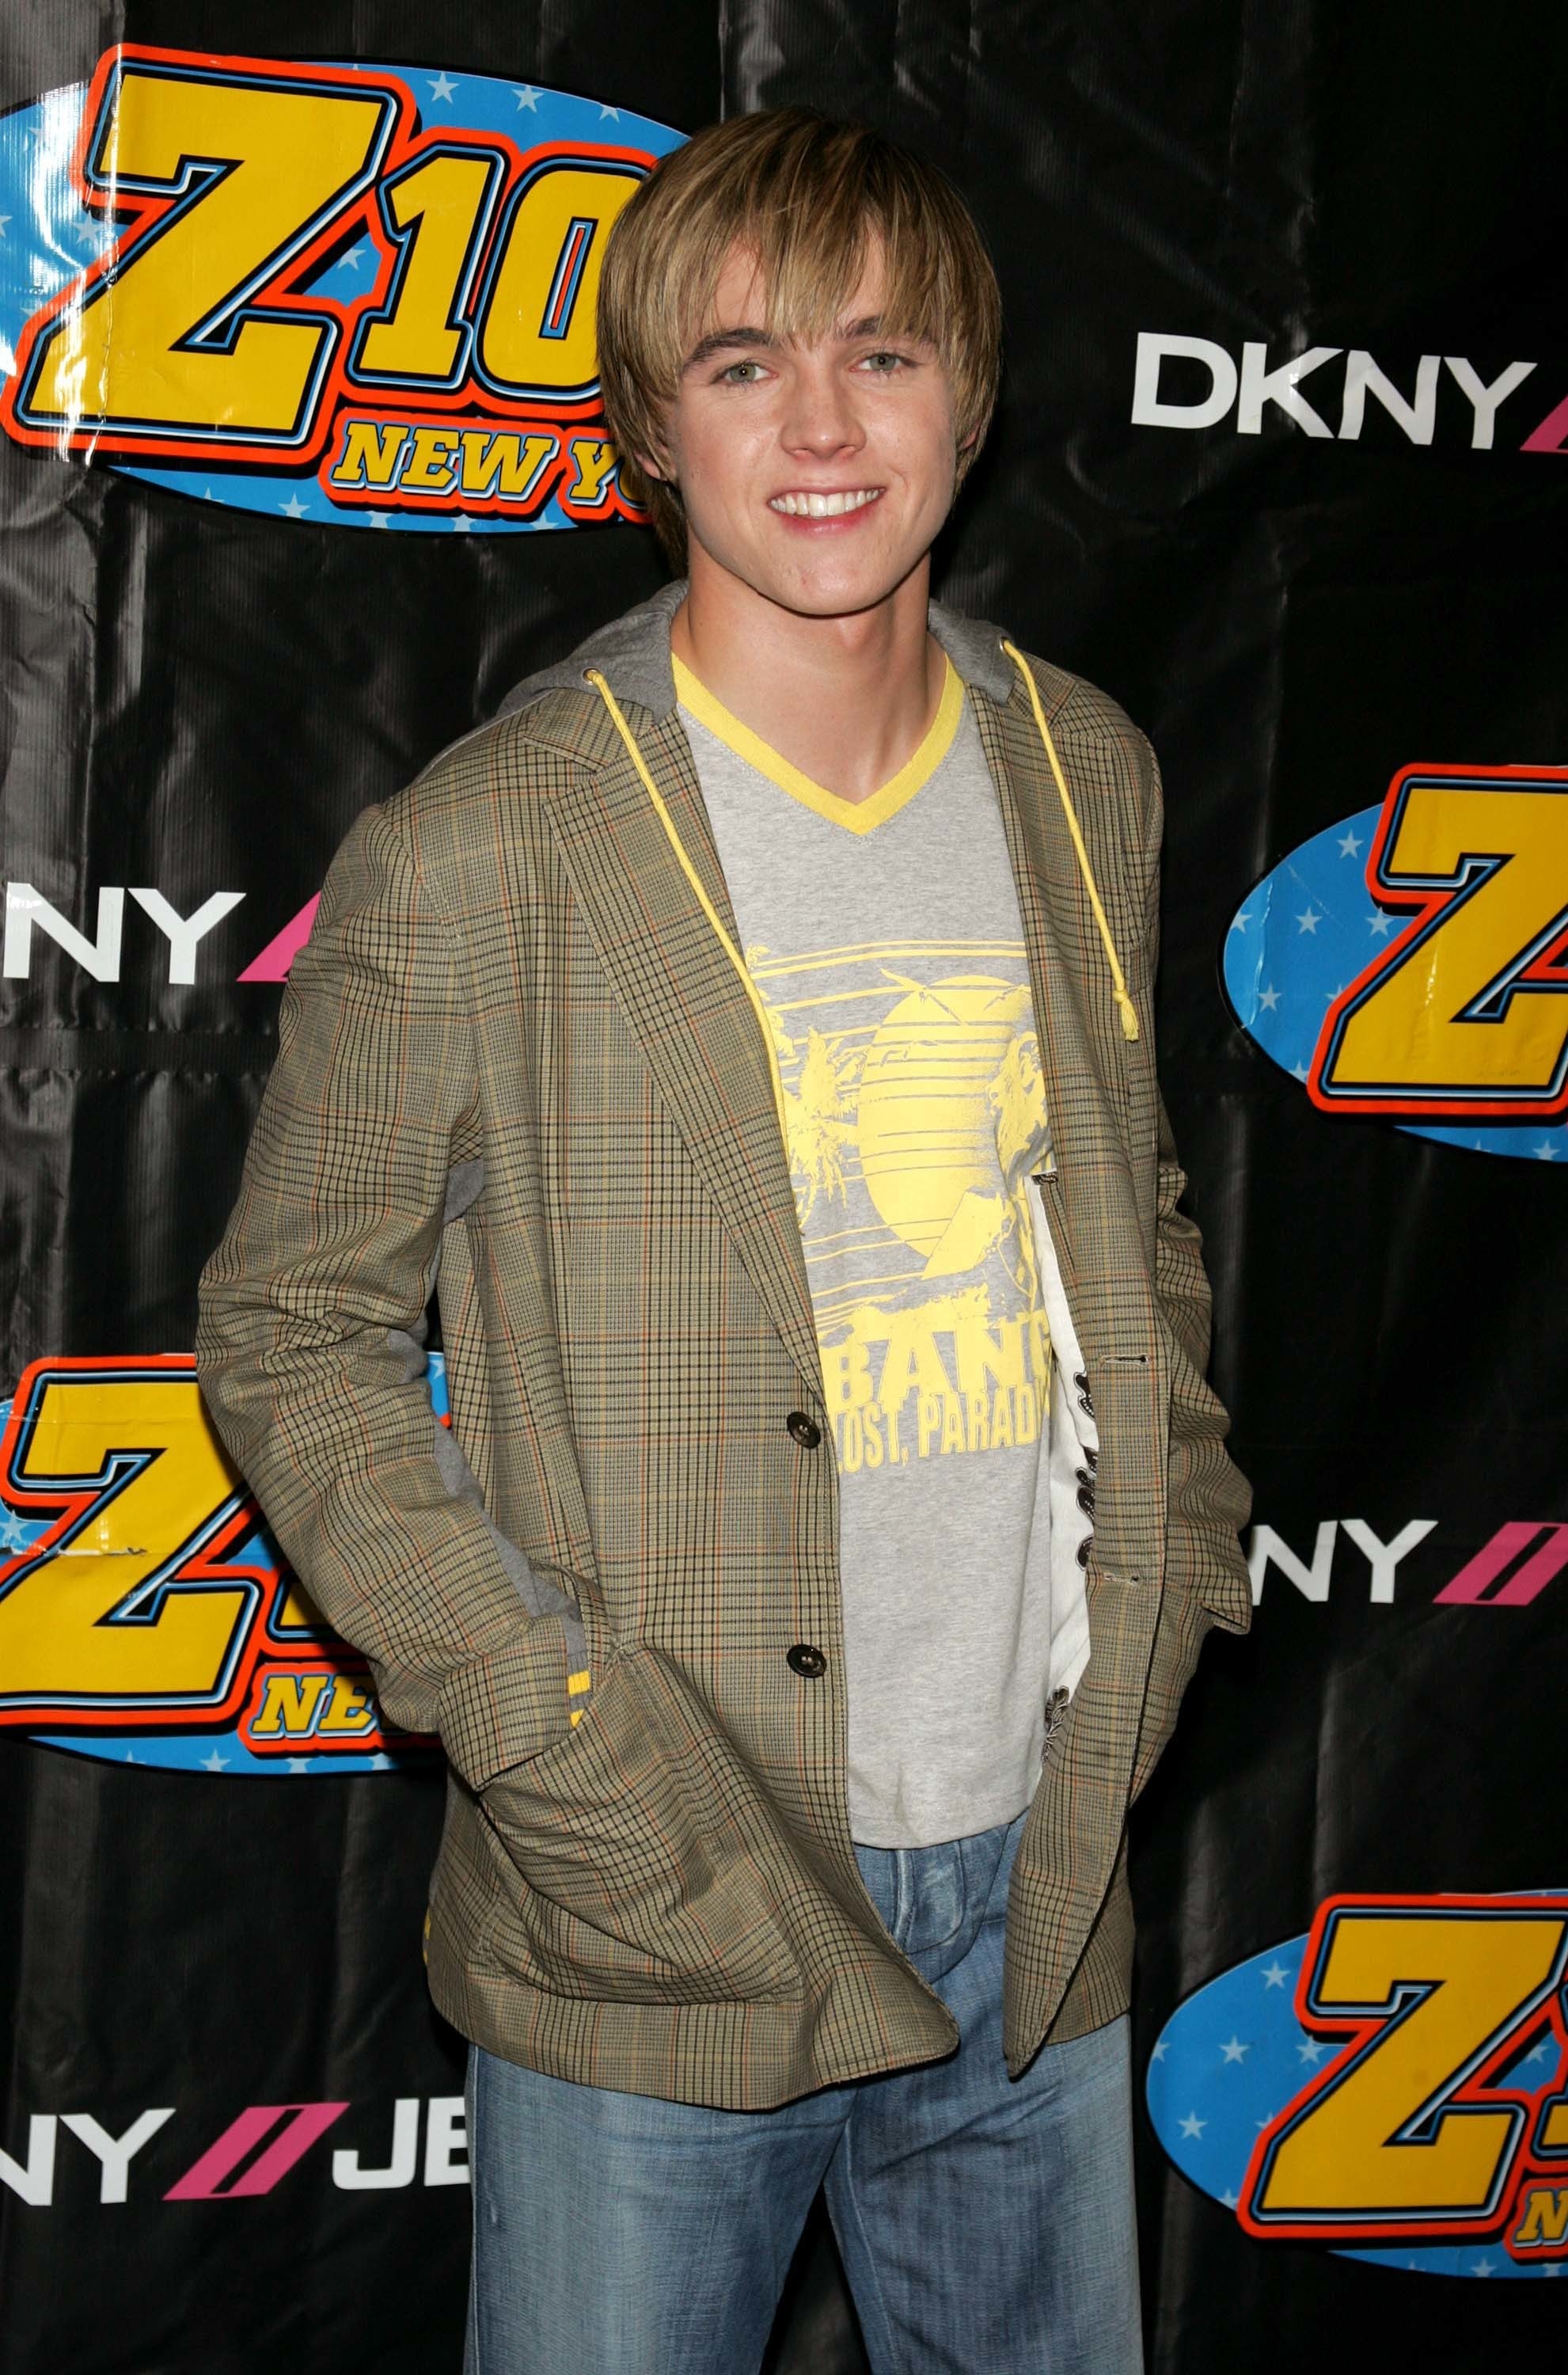 jesse wearing a blazer and jeans at an event